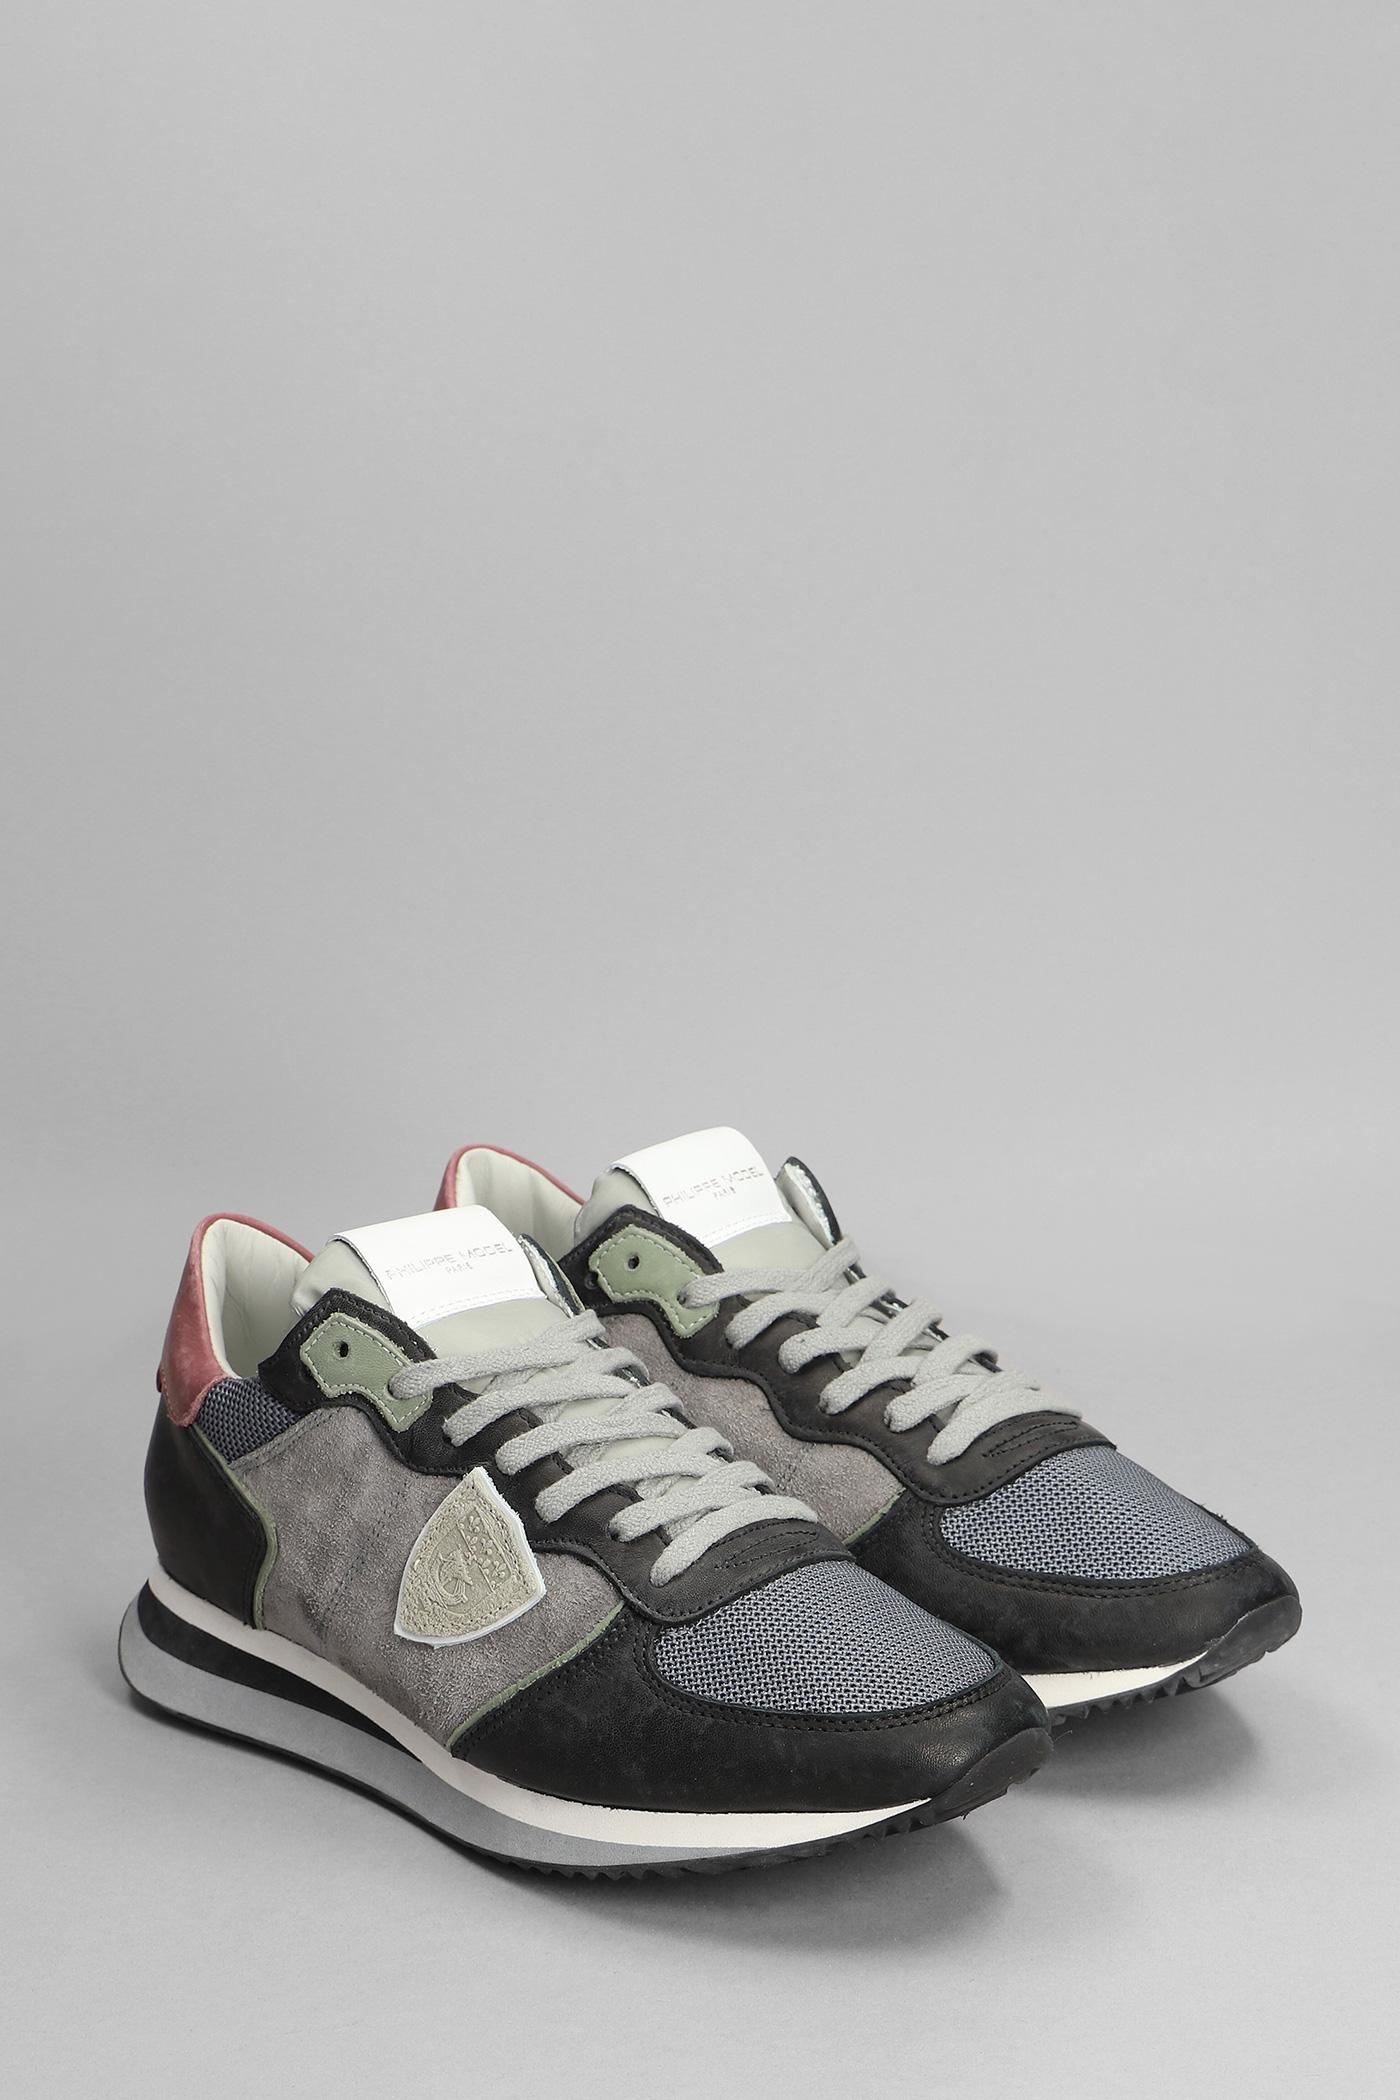 Philippe Model Trpx Sneakers In Grey Suede And Fabric in Gray | Lyst